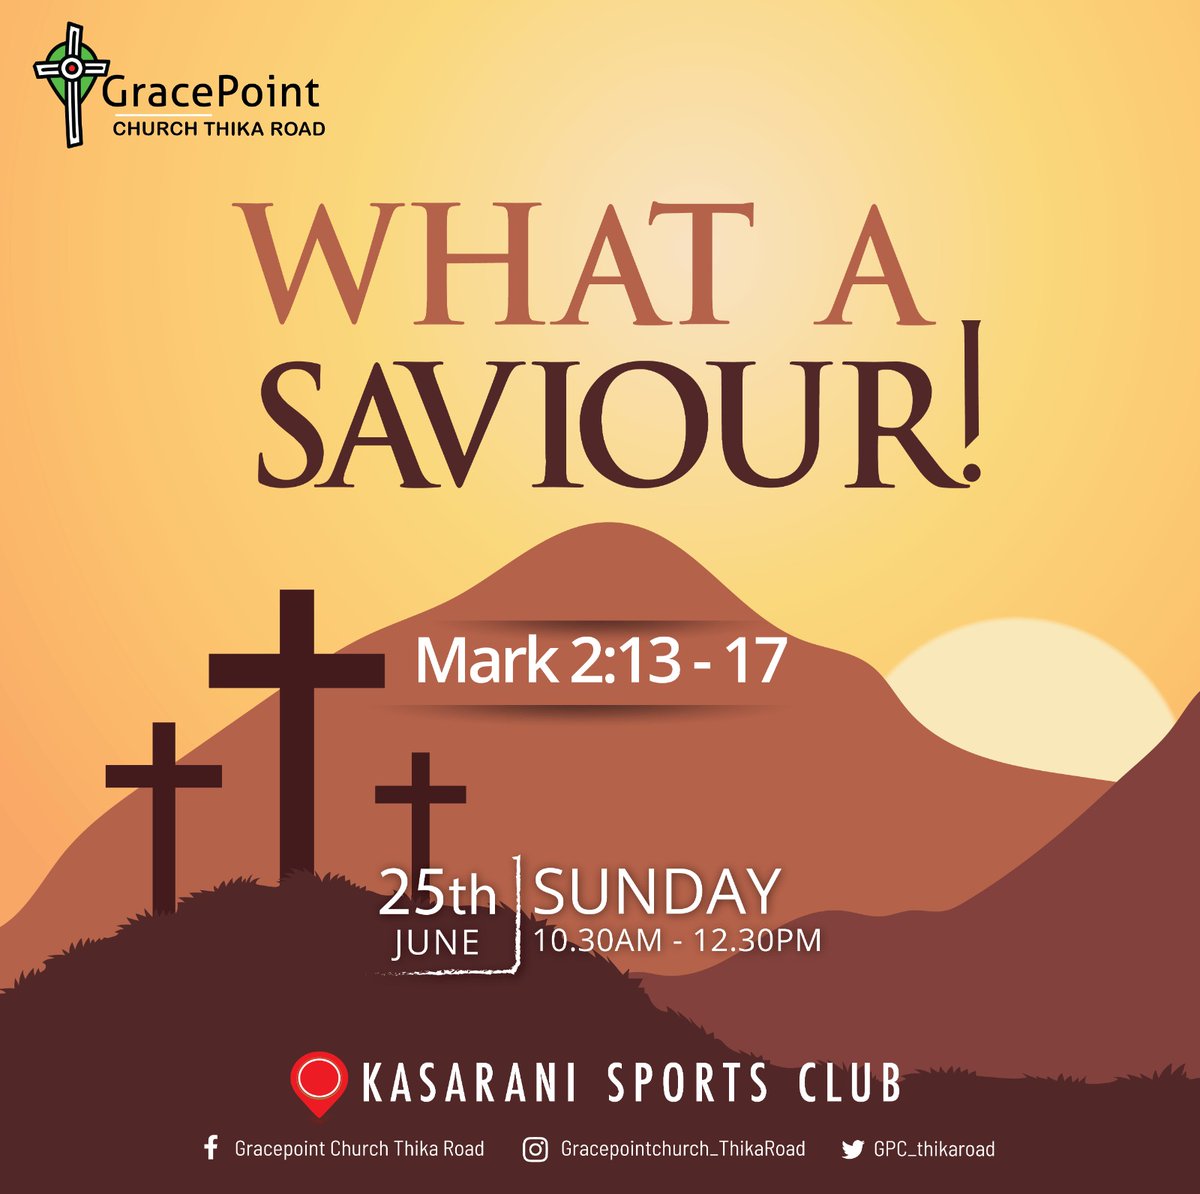 Join us tomorrow as we see a Saviour who came for the unworthy, vile, wretched